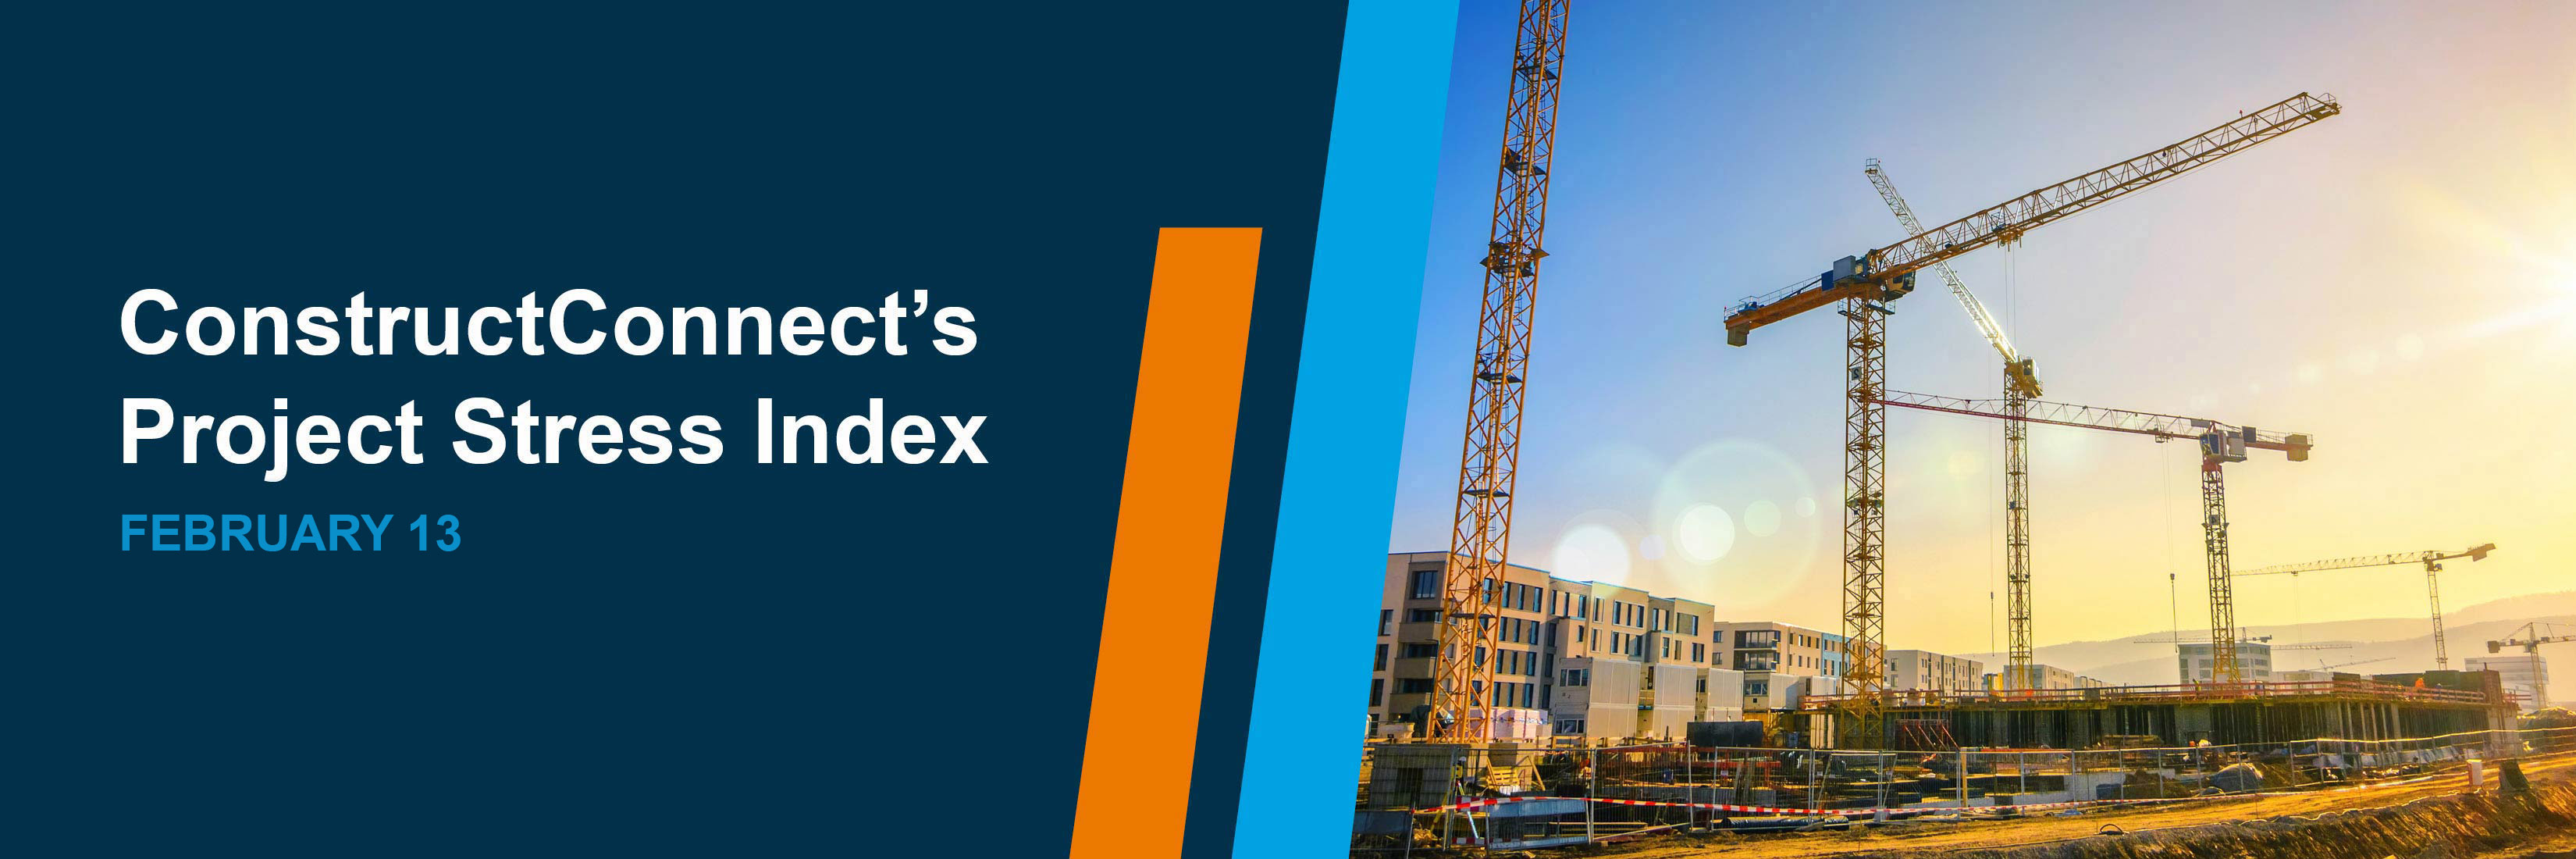 ConstructConnect's Project Stress Index - February 13